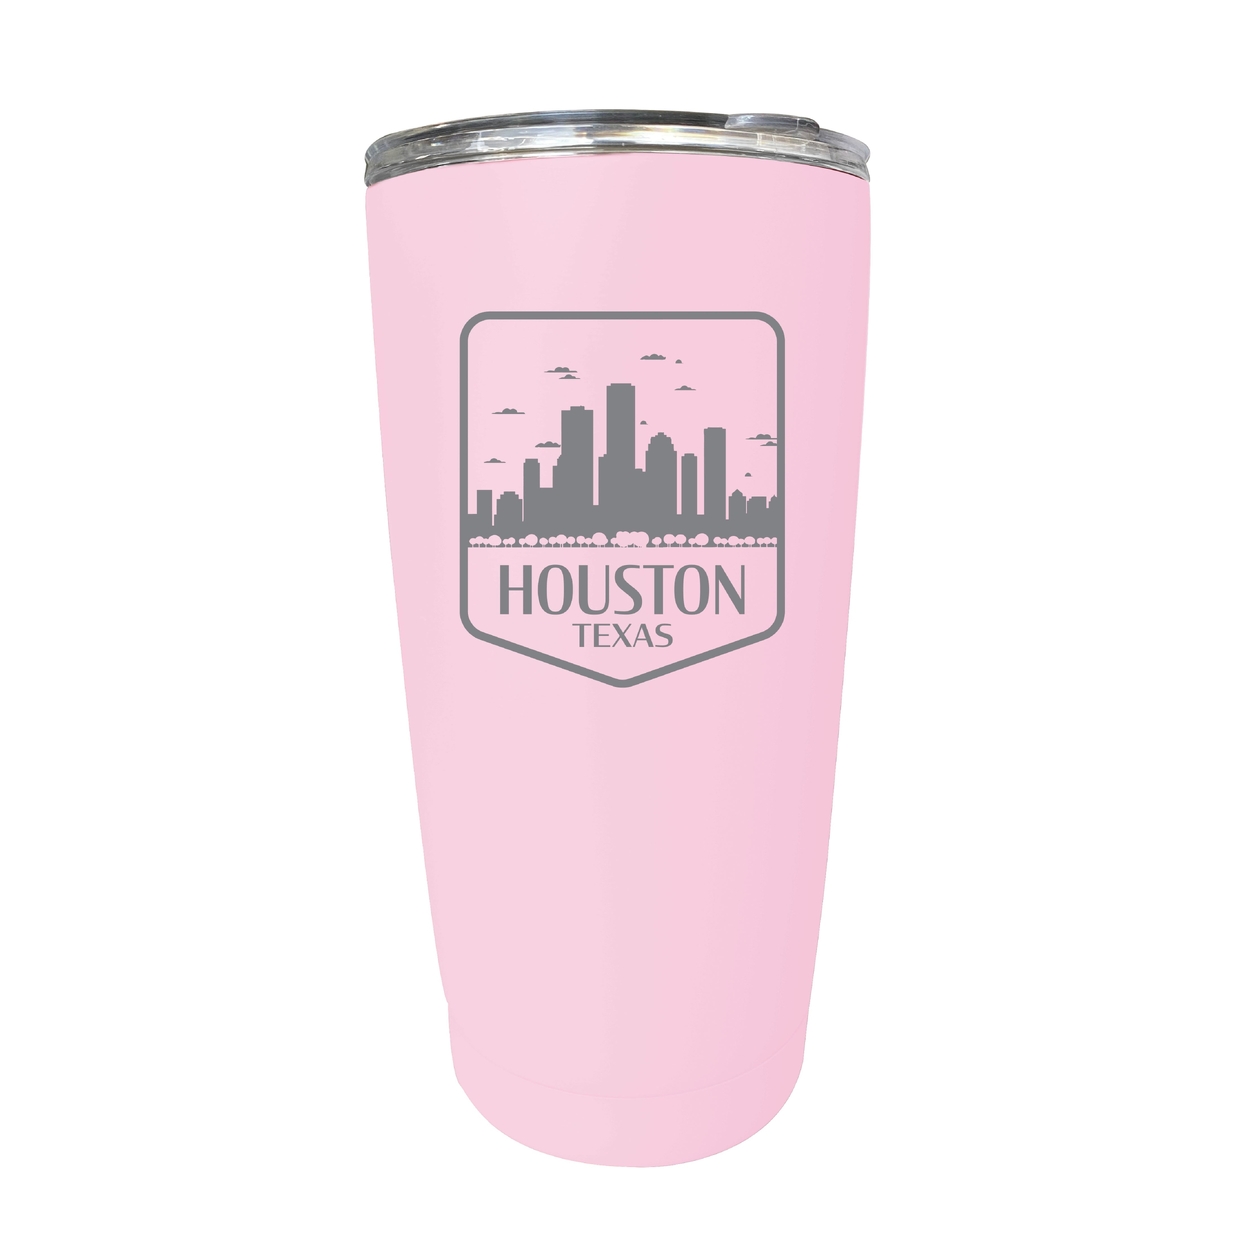 Houston Texas Souvenir 16 Oz Engraved Stainless Steel Insulated Tumbler - Pink,,4-Pack